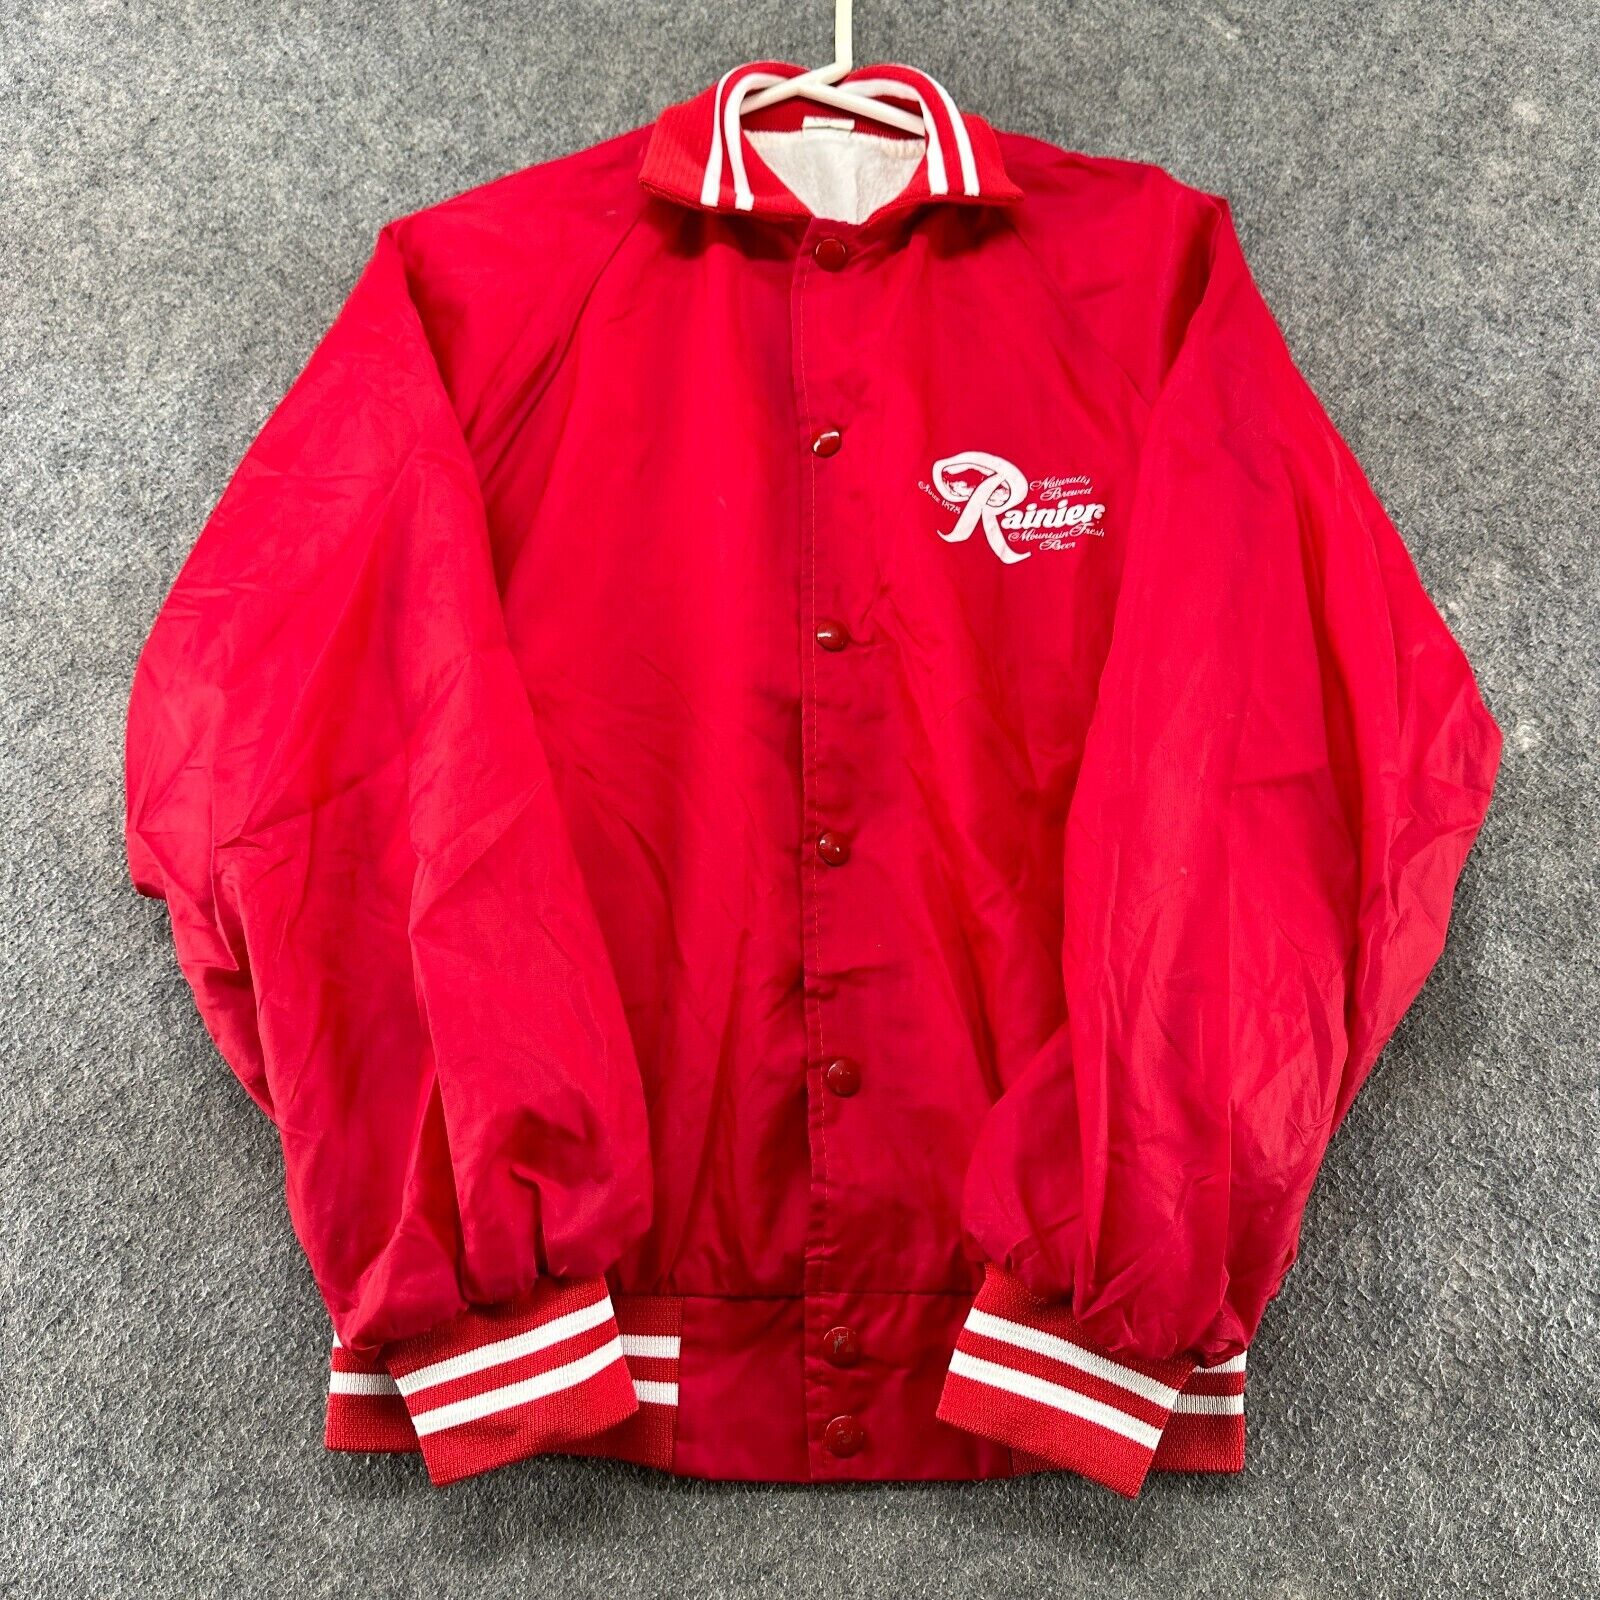 VINTAGE Rainier Beer Jacket Mens Small Red Coaches Lined Nylon USA Made 80s